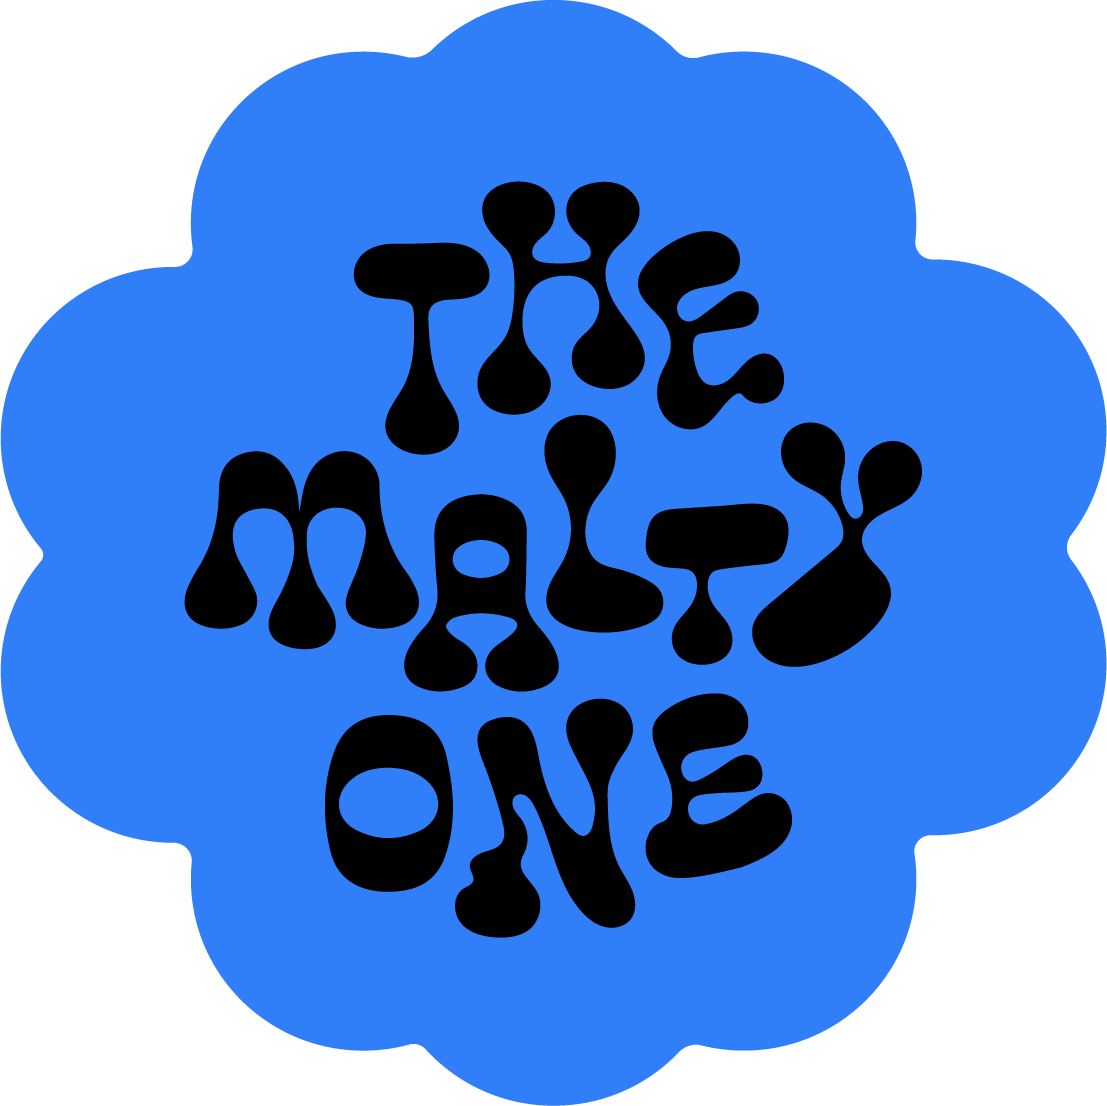 The Malty One logo